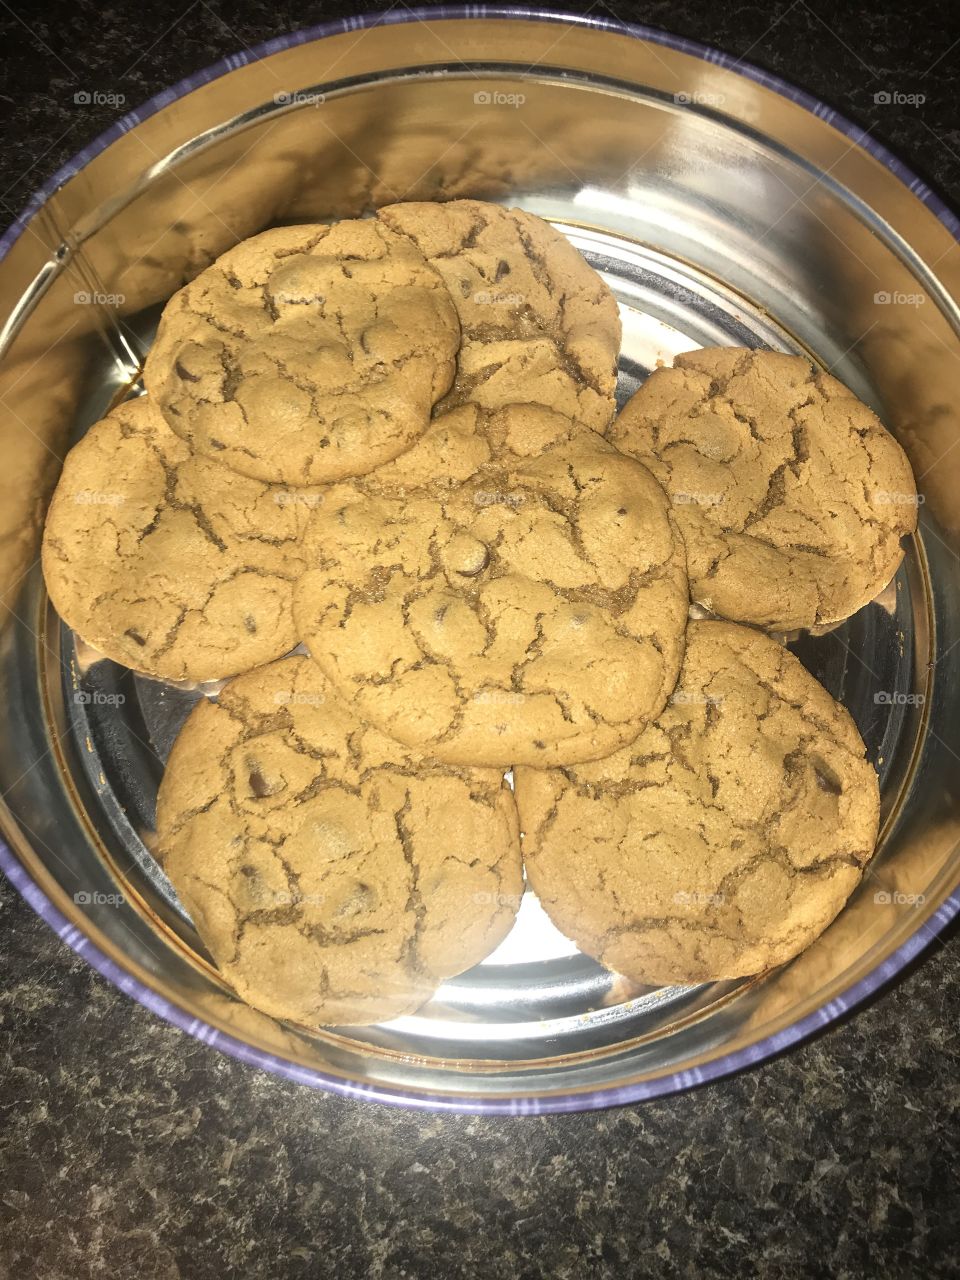 Yummy looking peanut butter chocolate chip cookies homemade with love